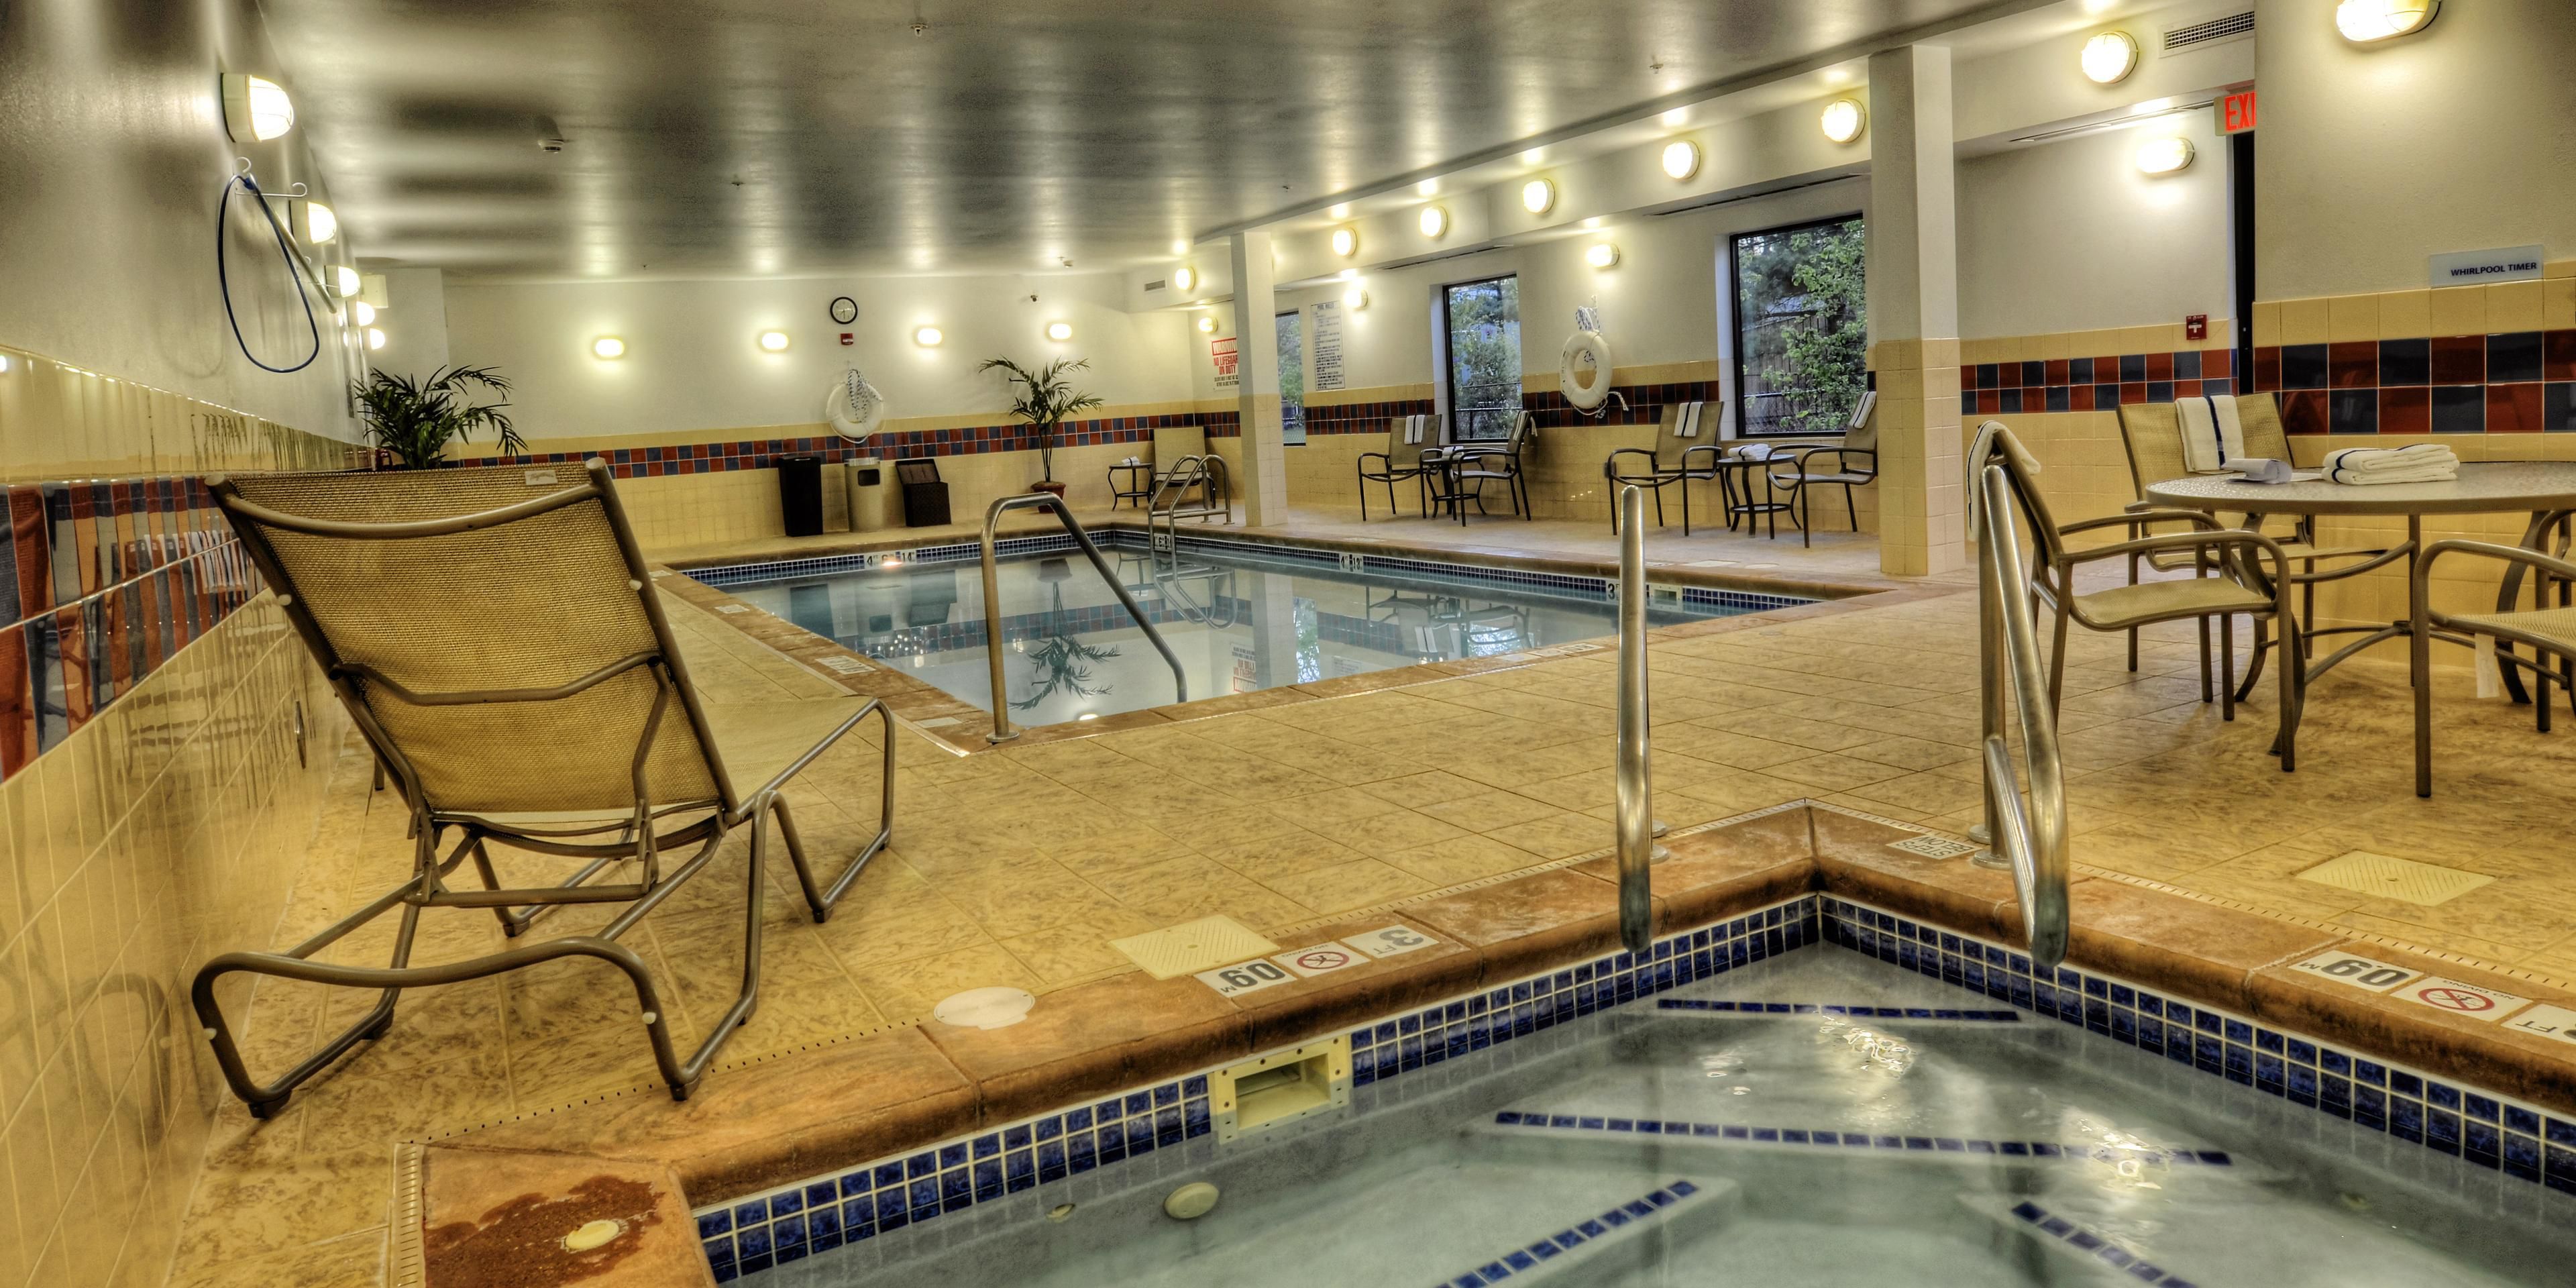 Our pool hours are 8 AM to 10:30 PM.